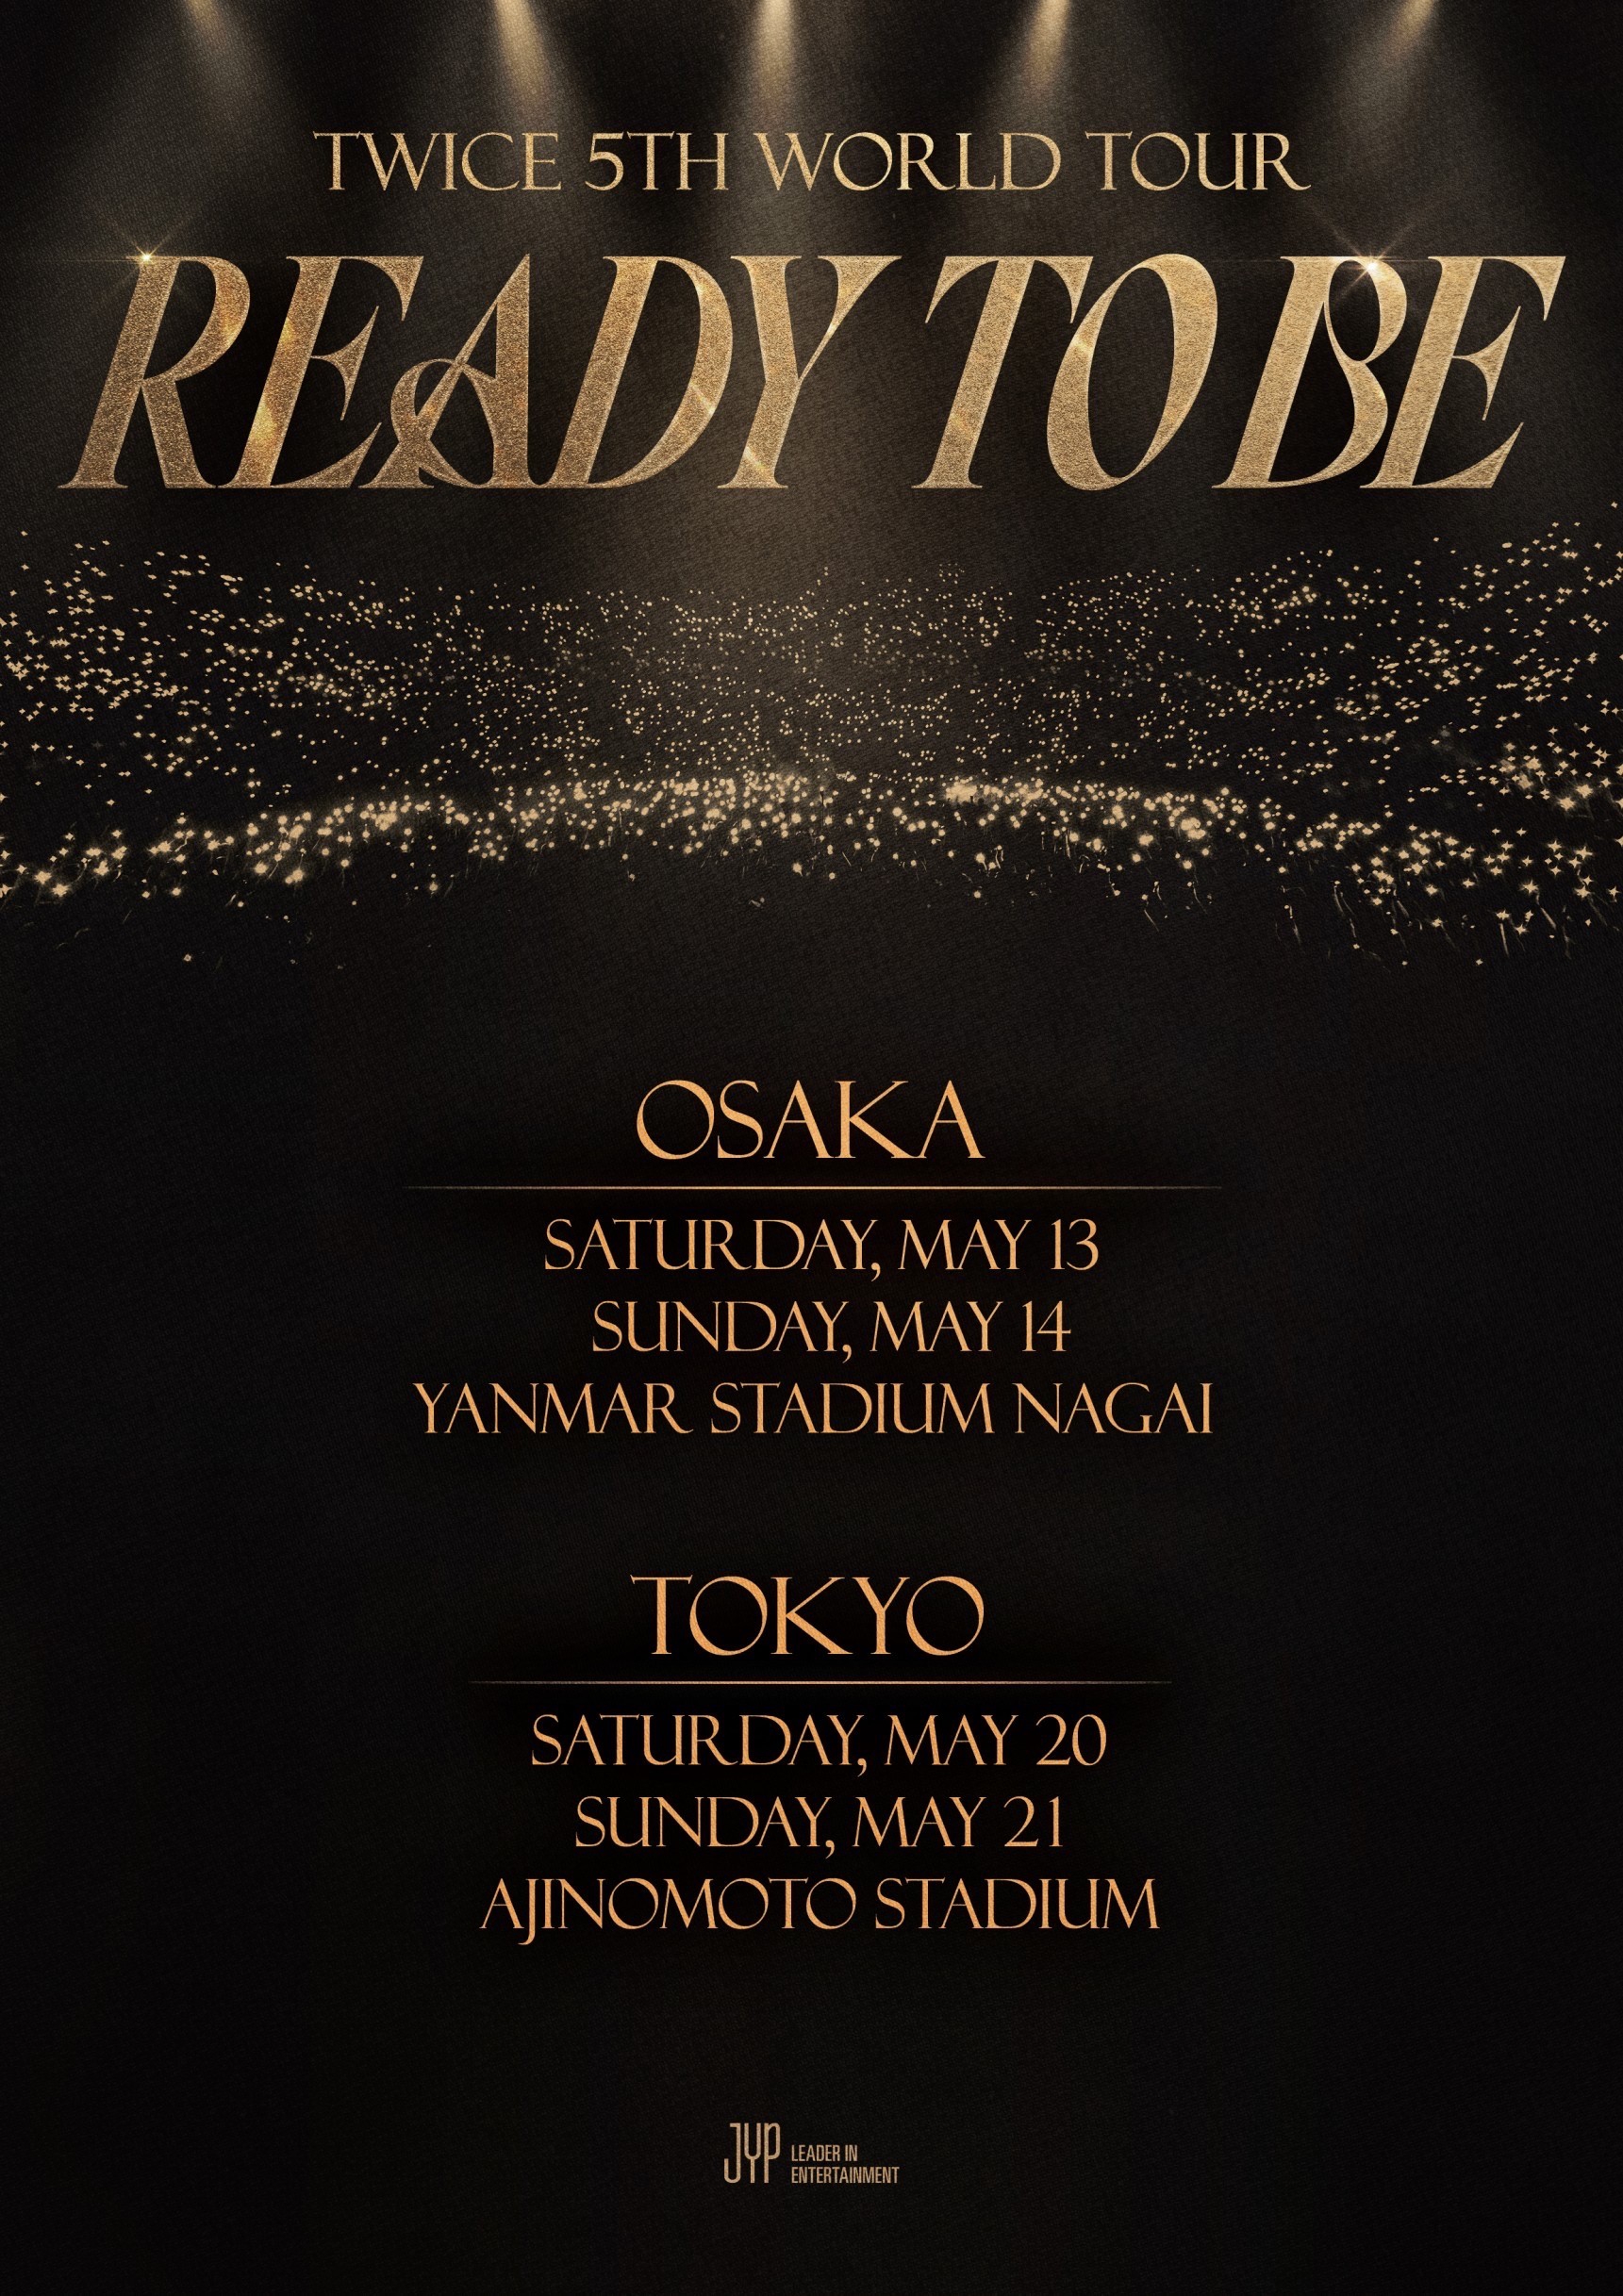 TWICE 5TH WORLD TOUR 'READY TO BE' in JAPAN、日本での初